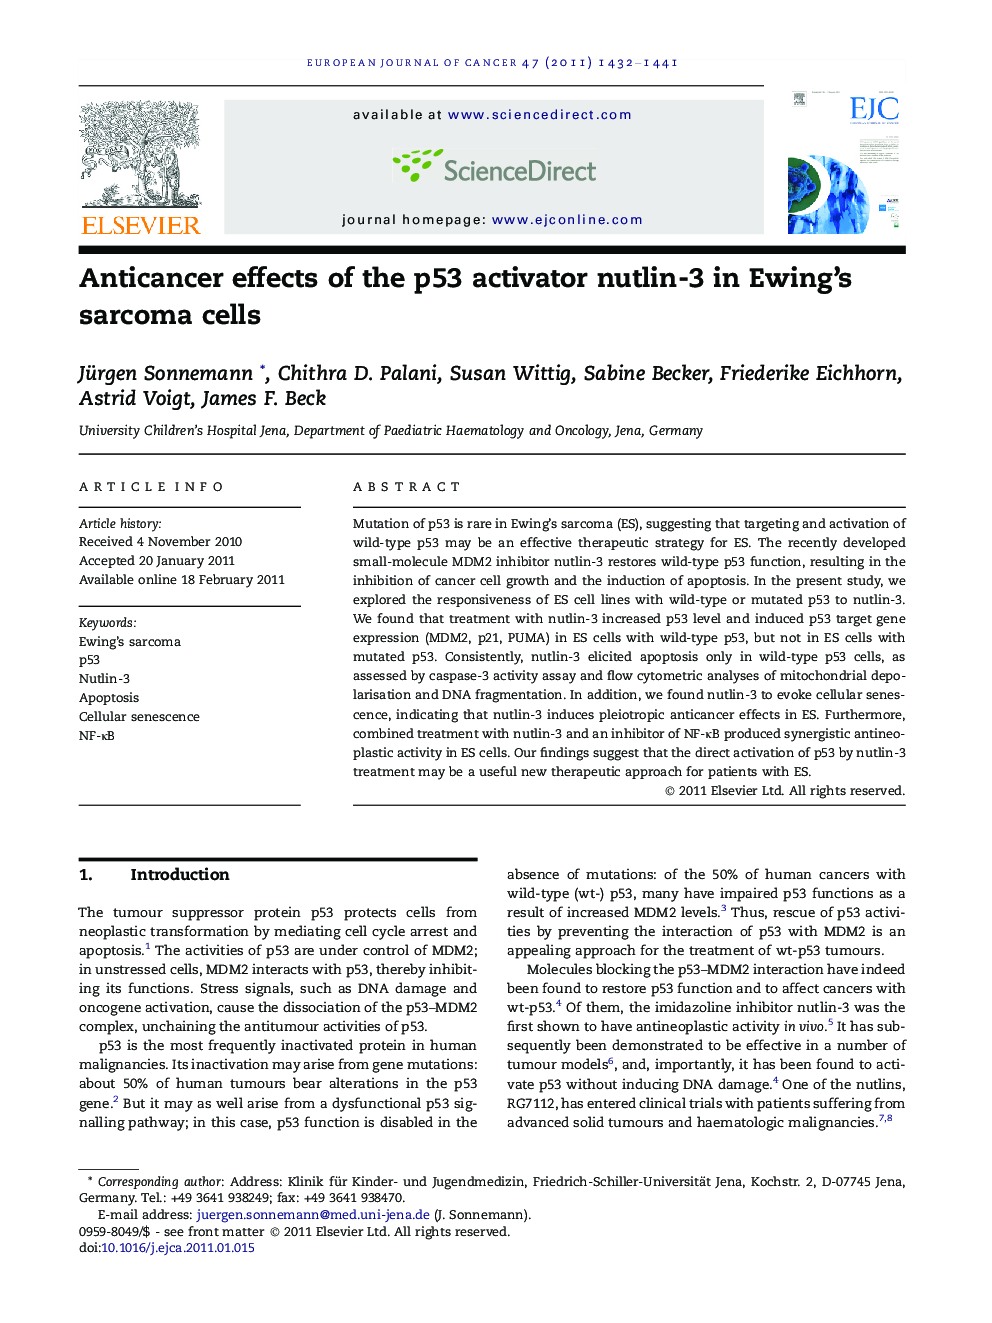 Anticancer effects of the p53 activator nutlin-3 in Ewing's sarcoma cells